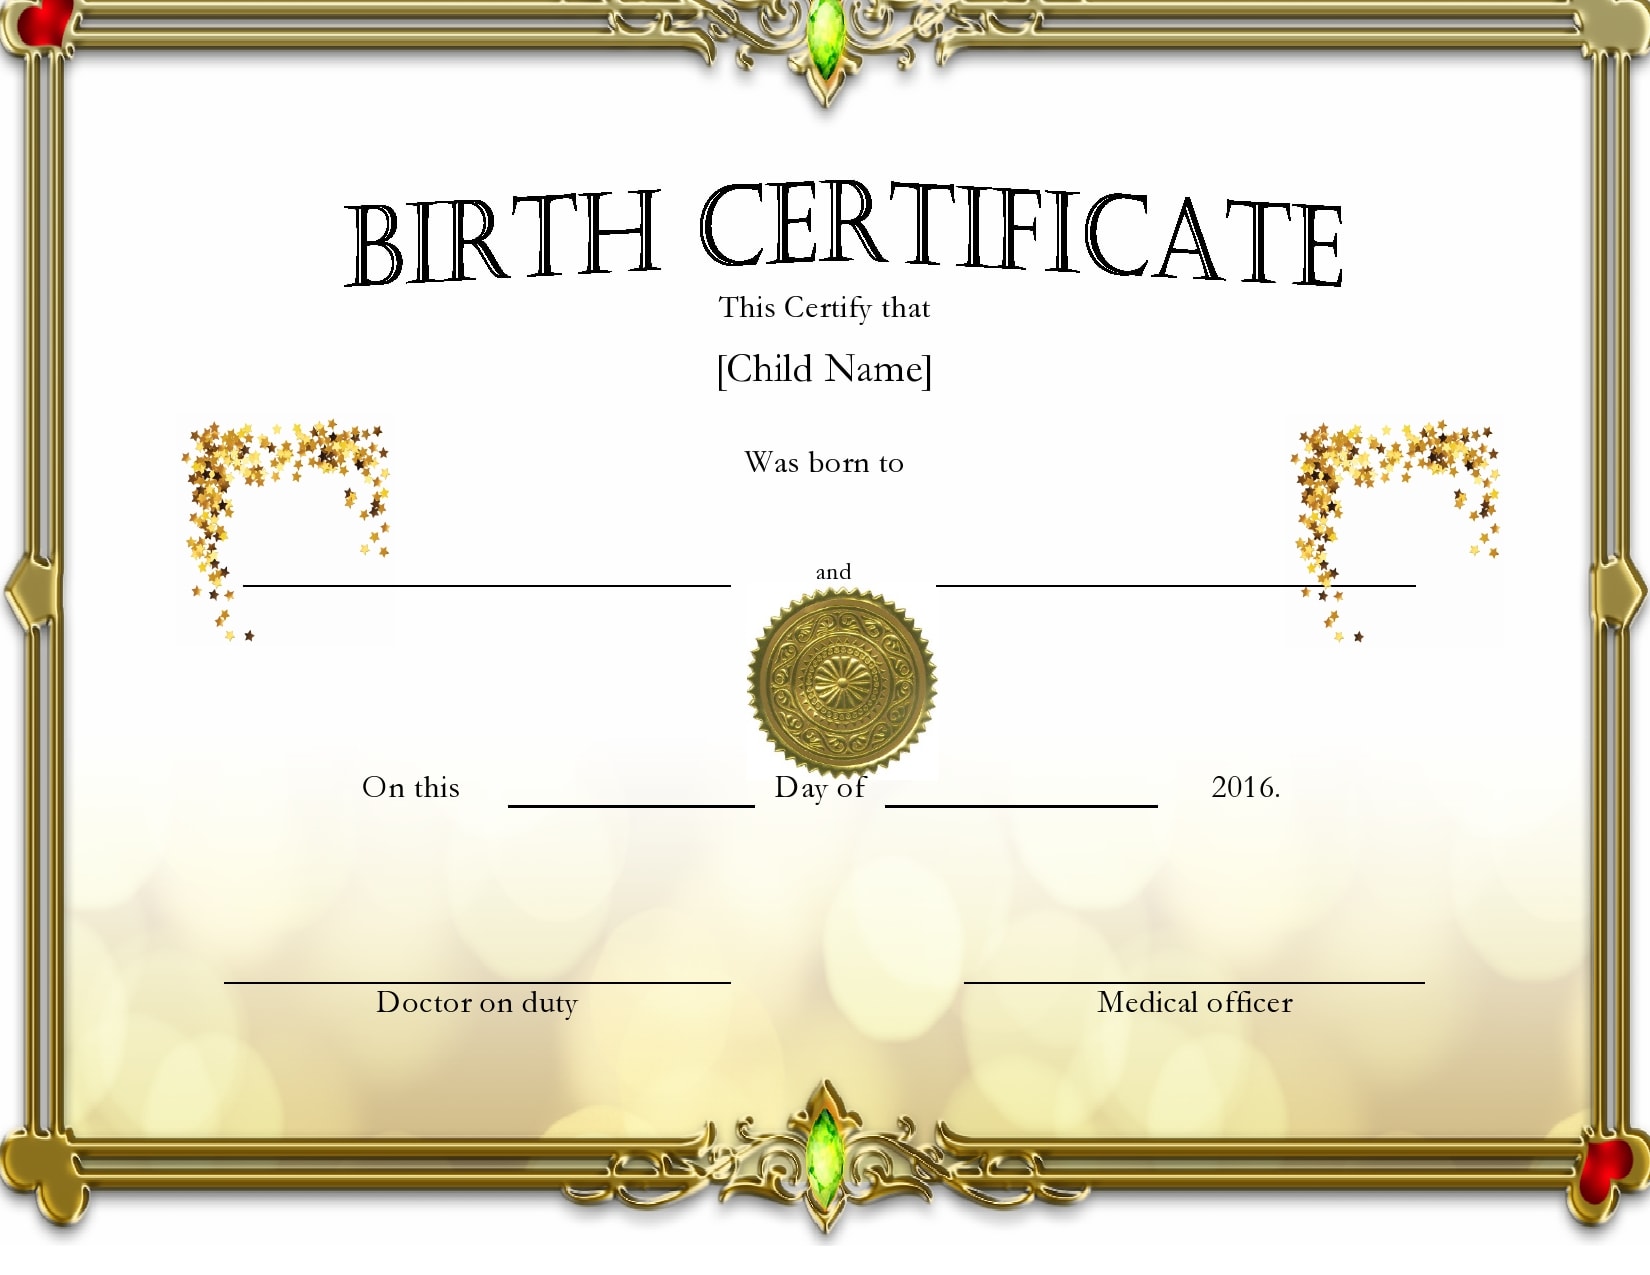 22 Blank Birth Certificate Templates (& Examples) - PrintableTemplates With Baby Death Certificate Template